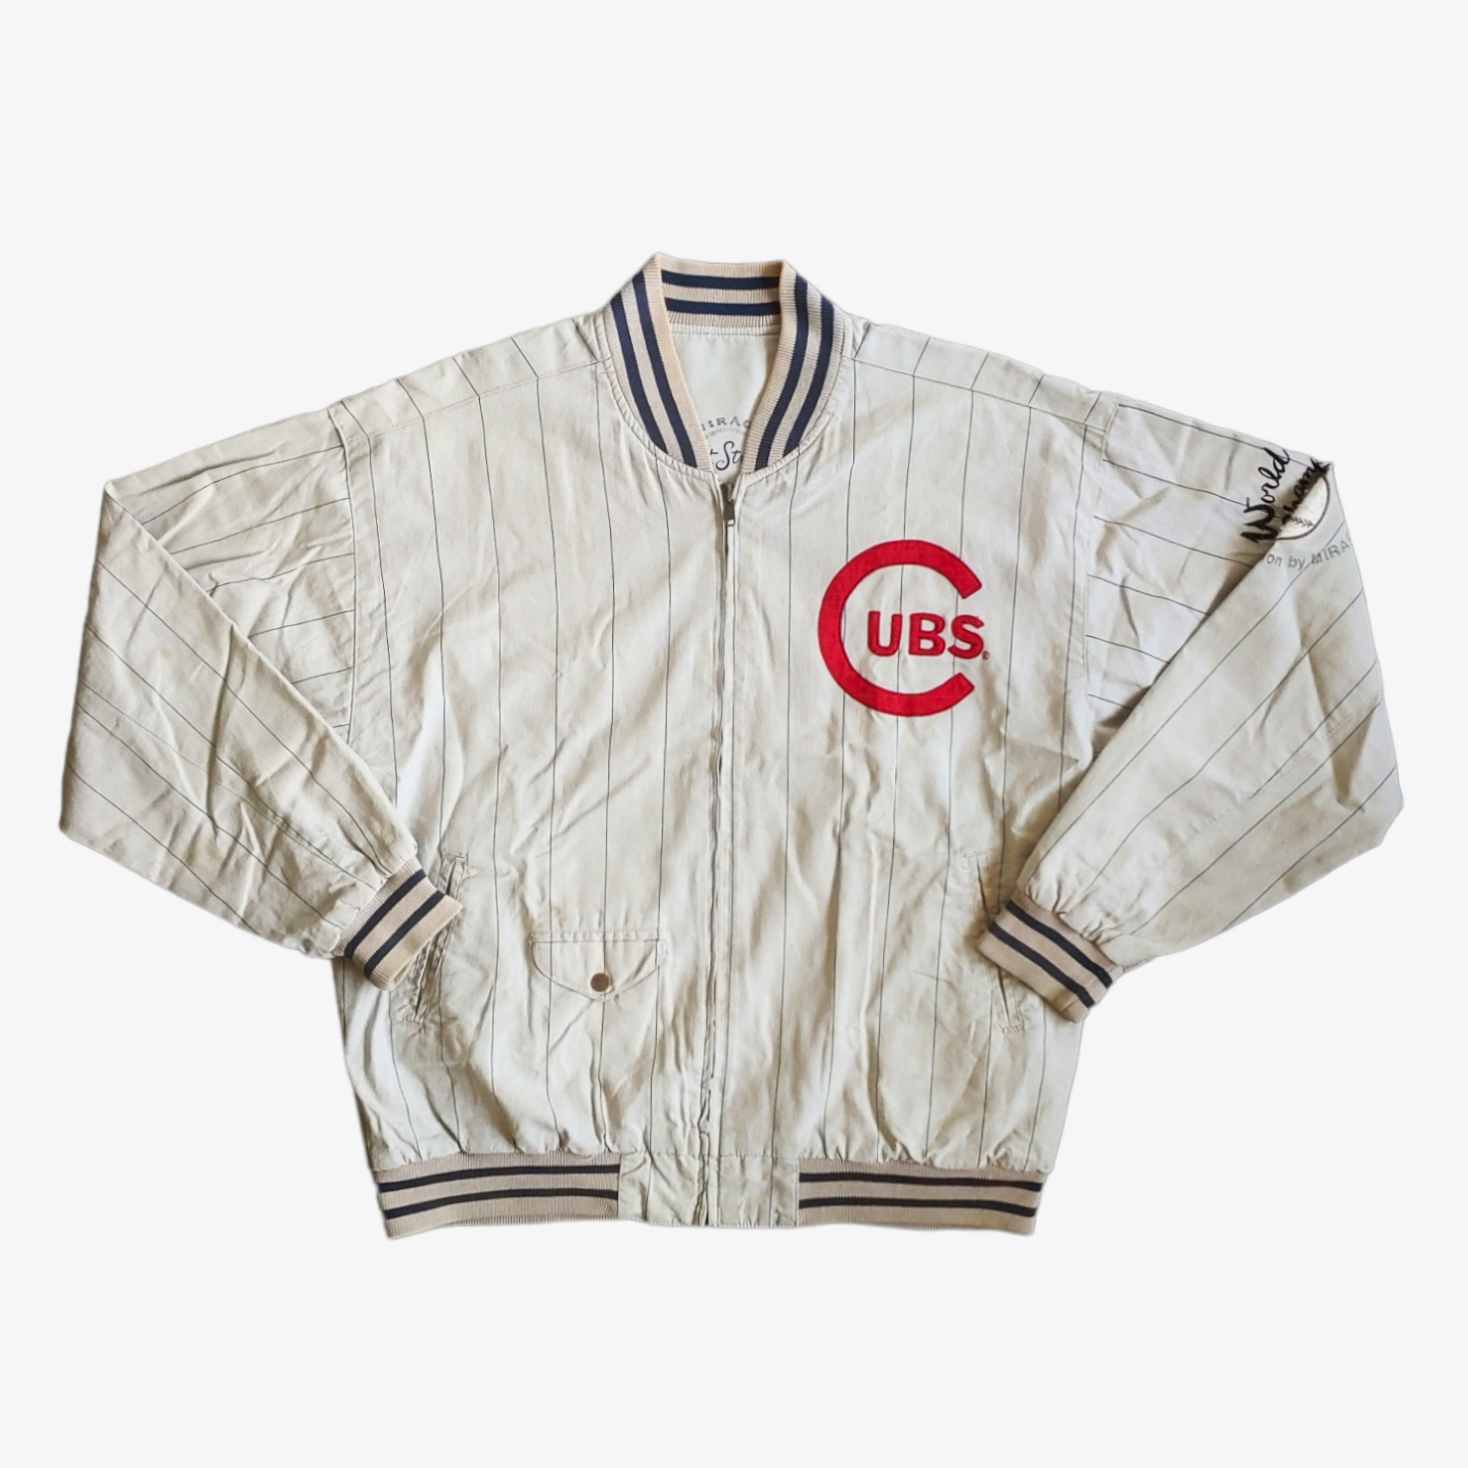 Vintage 90s Mirage First String MLB Chicago Cubs Reversible Baseball Jacket - Casspios Dream